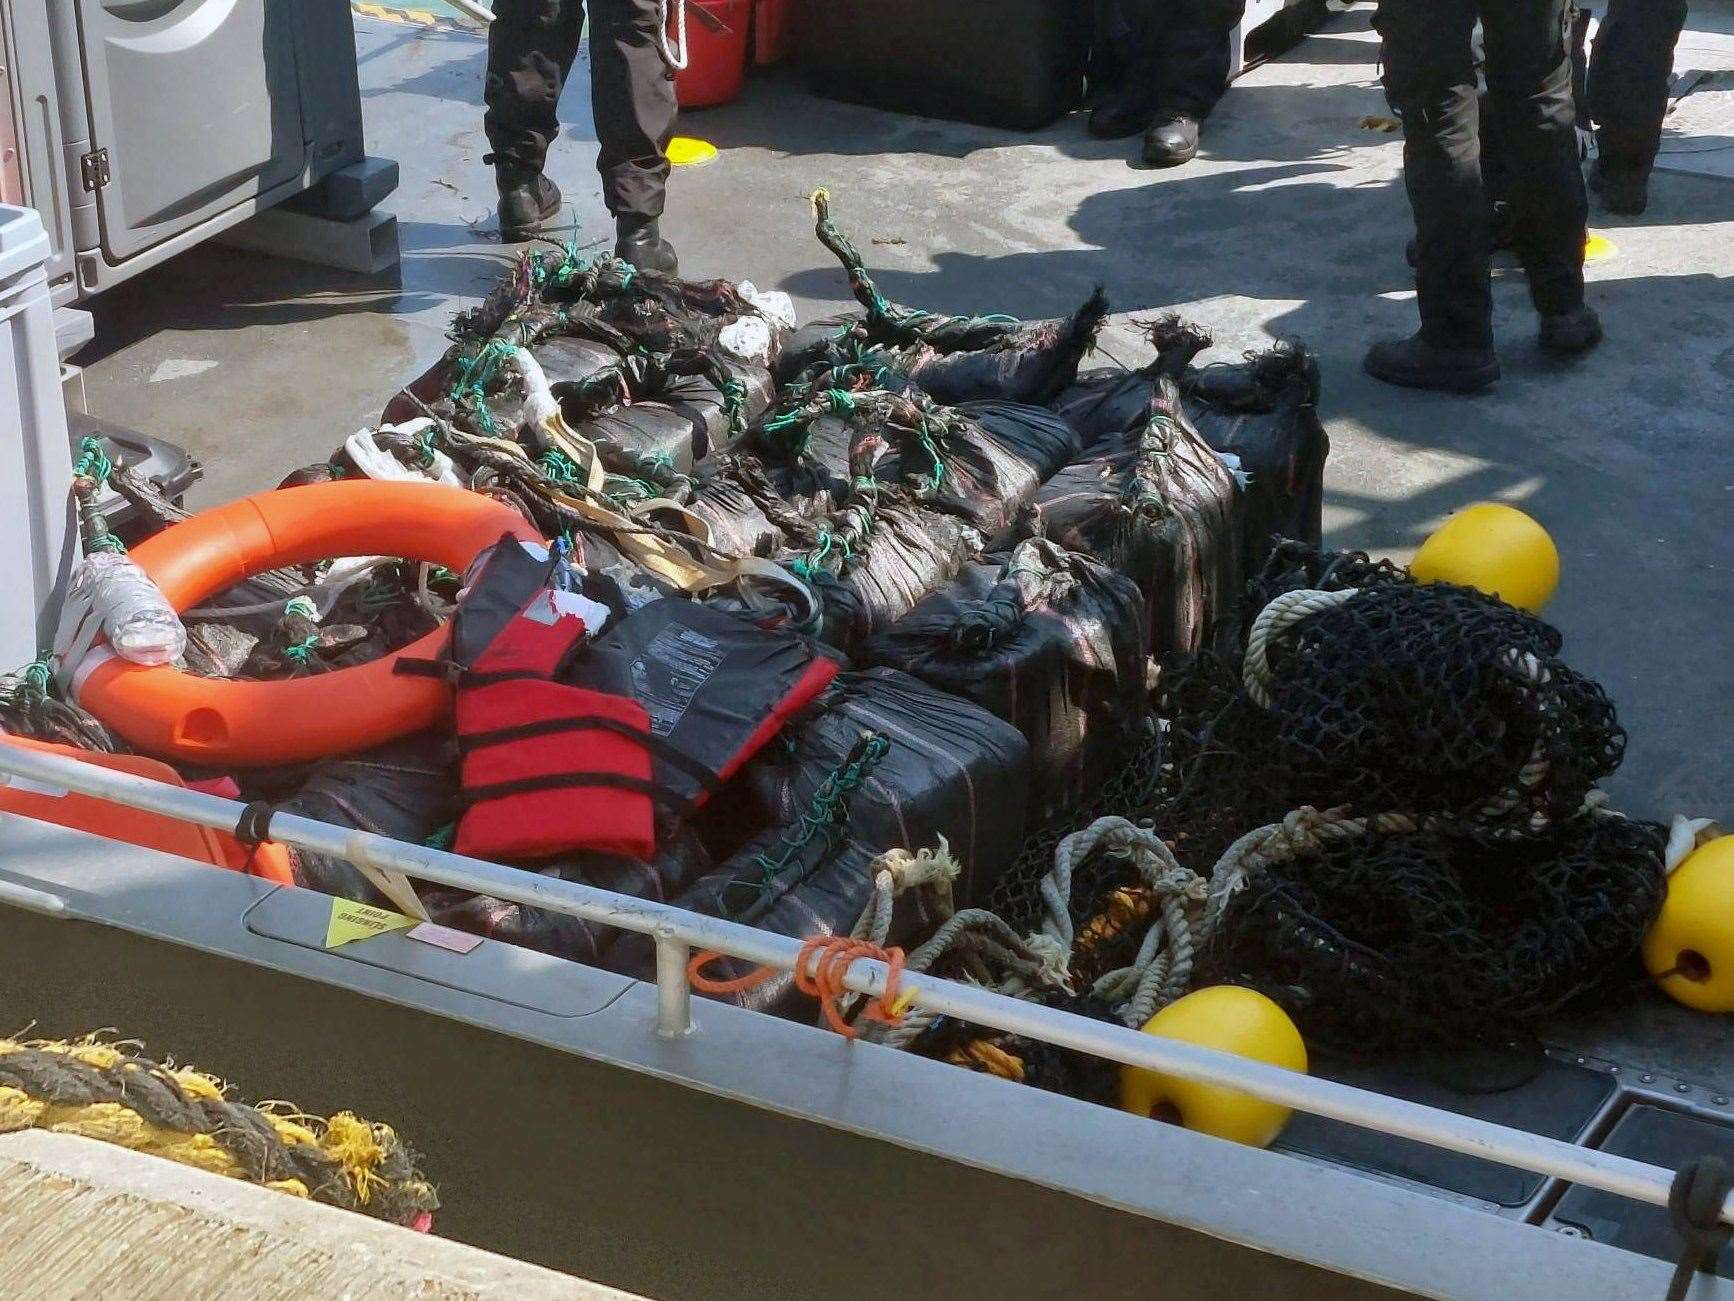 The large haul was intercepted in the English Channel